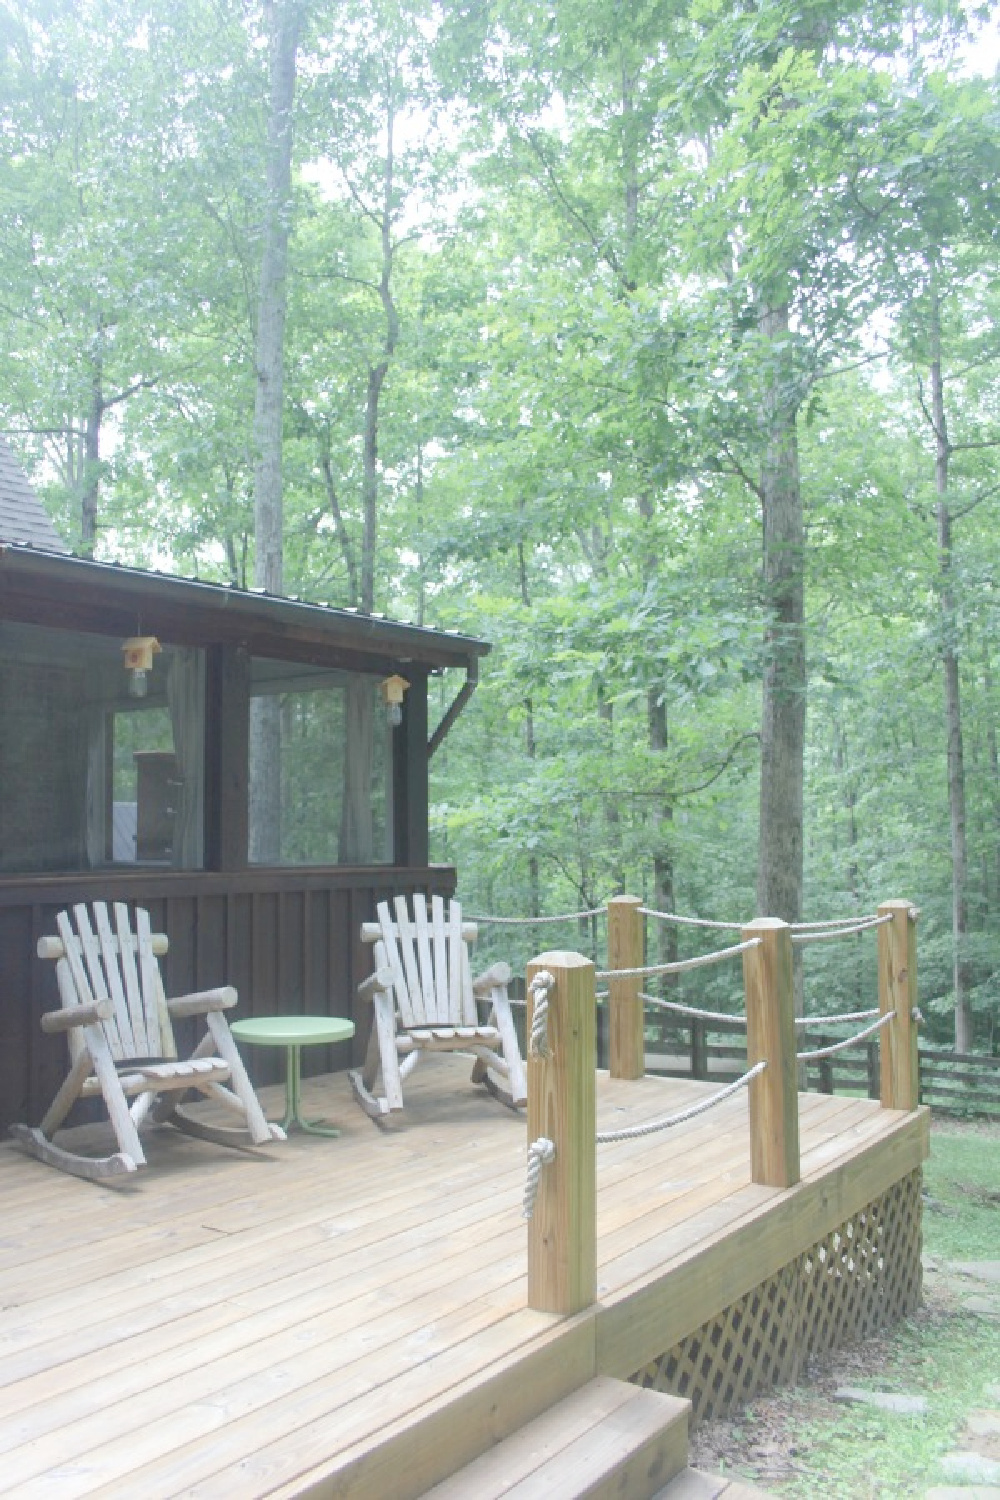 Deck with Adirondack chairs at rustic country cottage in Leiper's Fork, TN known as storybook cottage - Hello Lovely Studio.